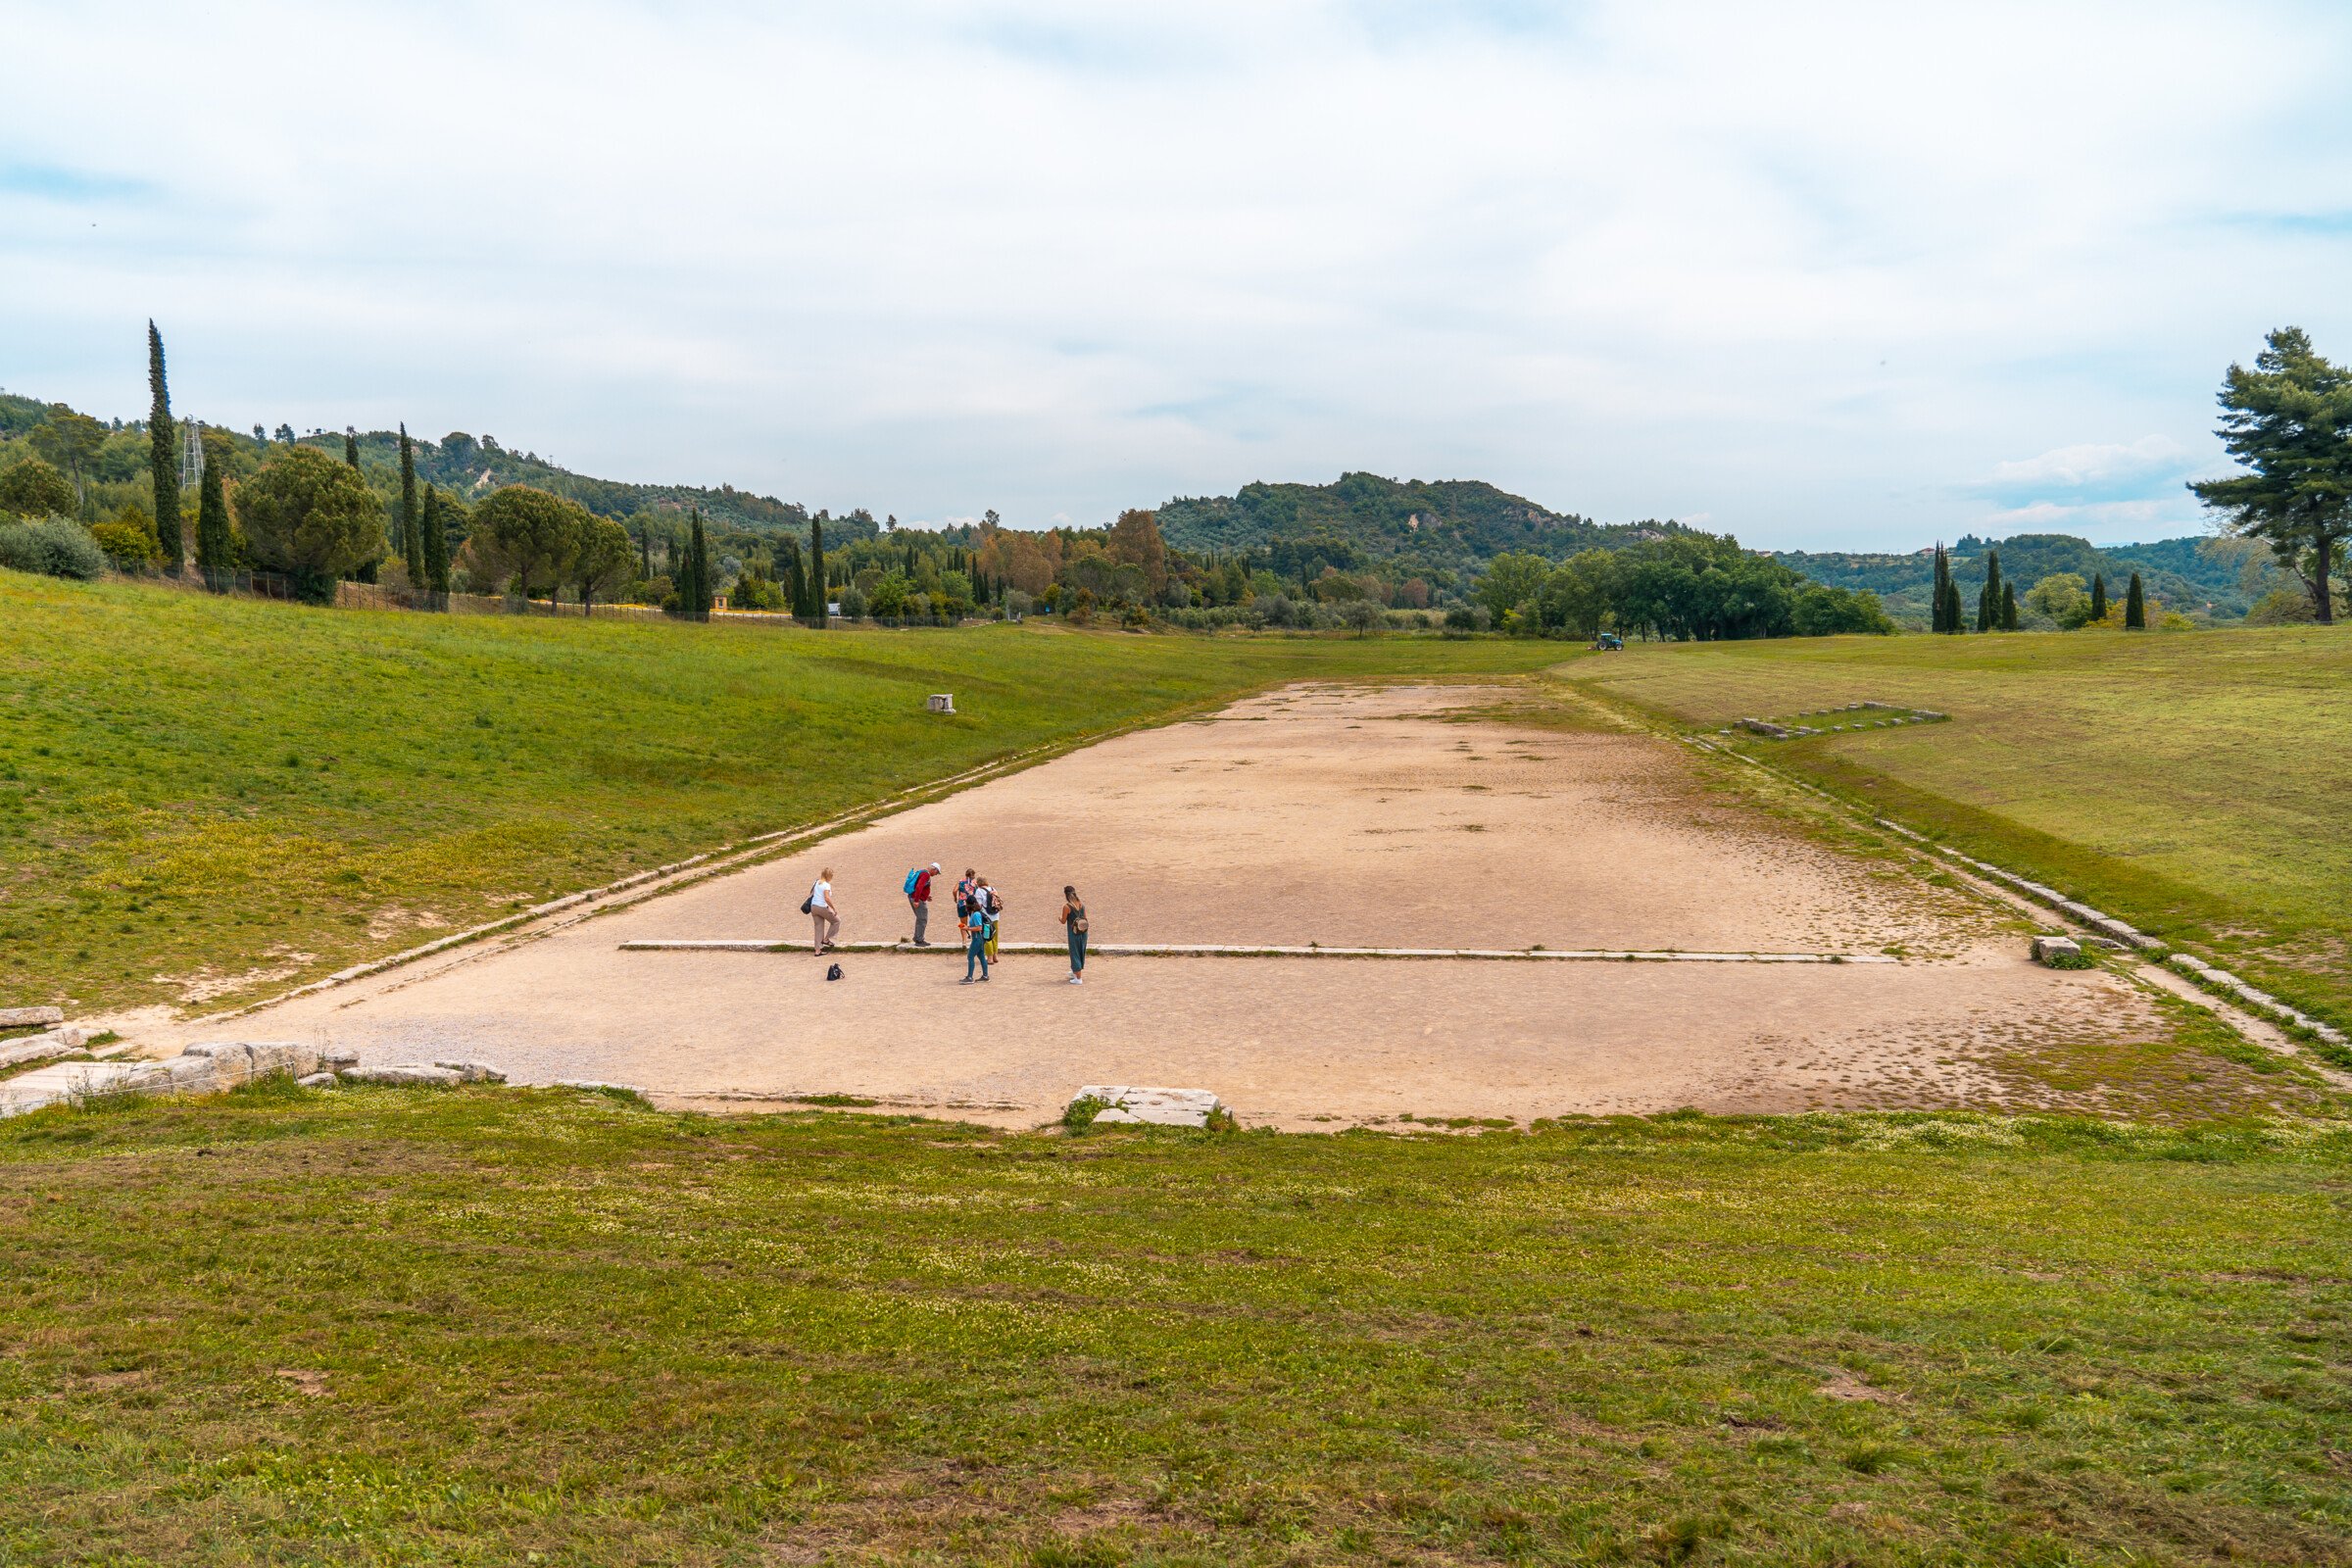 This image shows the Stadium in Ancient Olympia, one of the top places to visit in mainland Greece. 